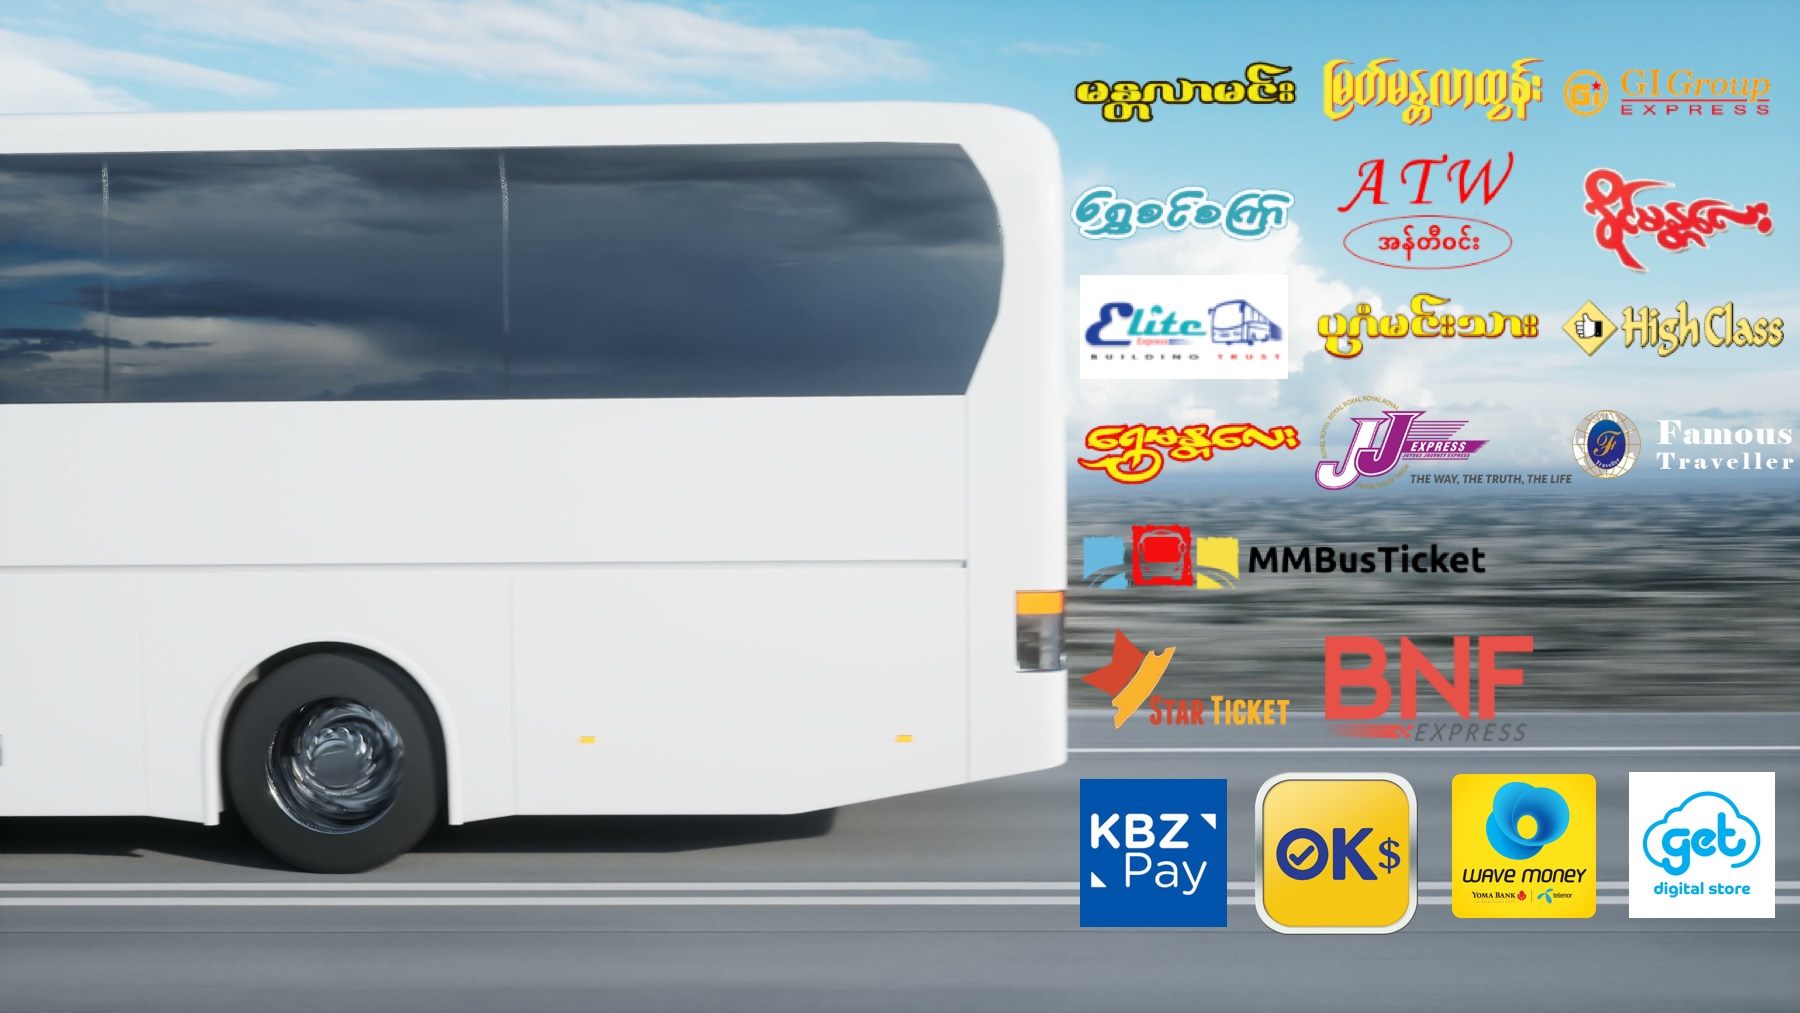 Myanmar Startups and Highway Express Bus Ticketing - A closer look